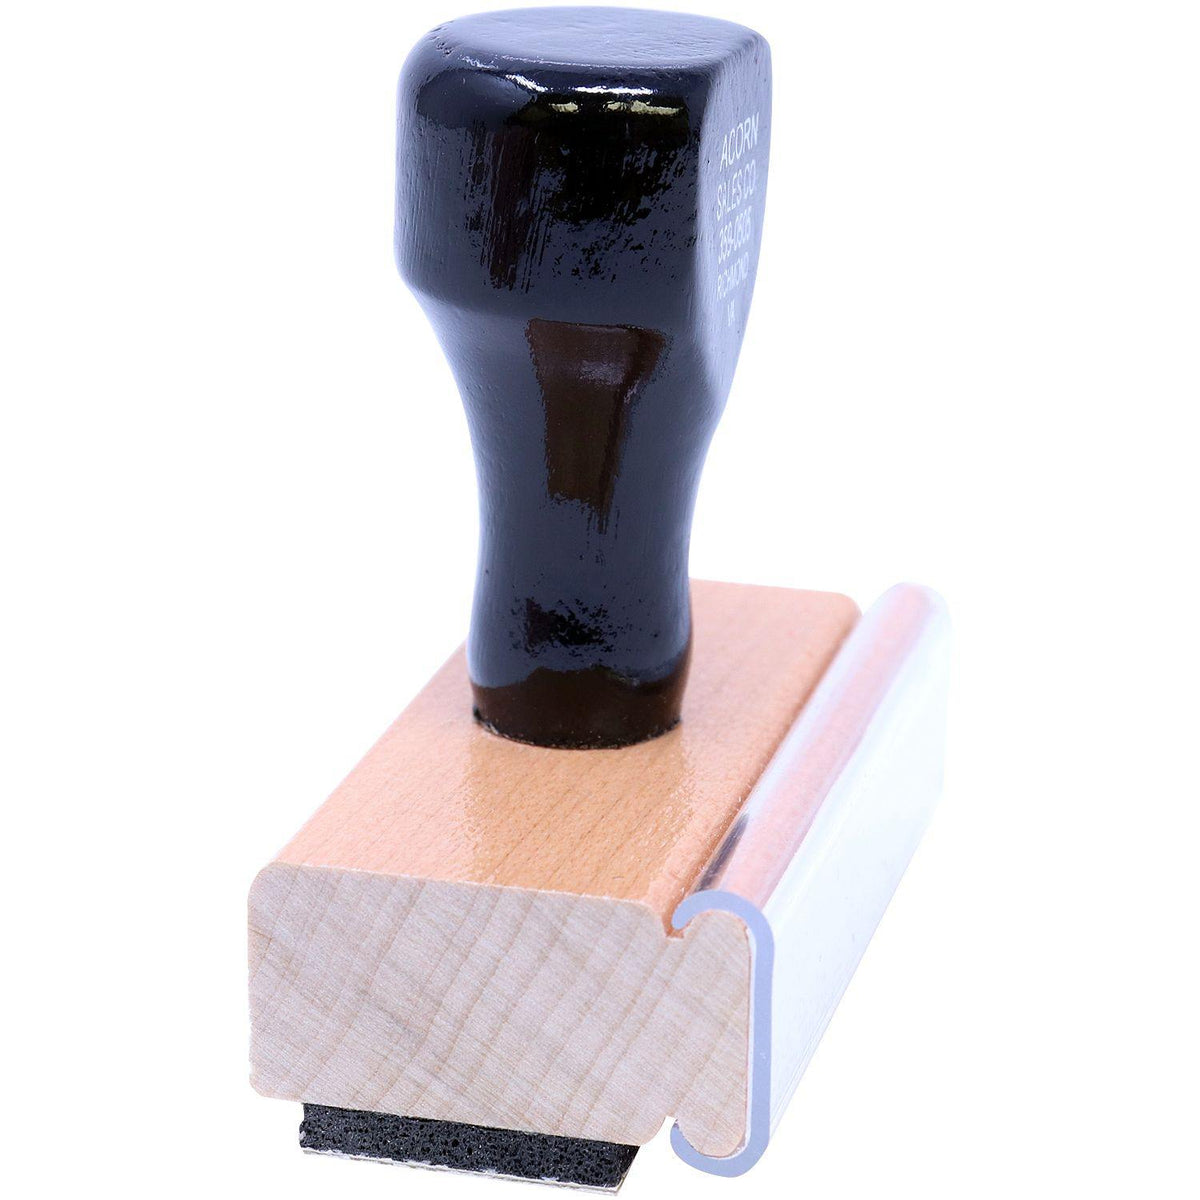 Side View of Large Paid Rubber Stamp at an Angle